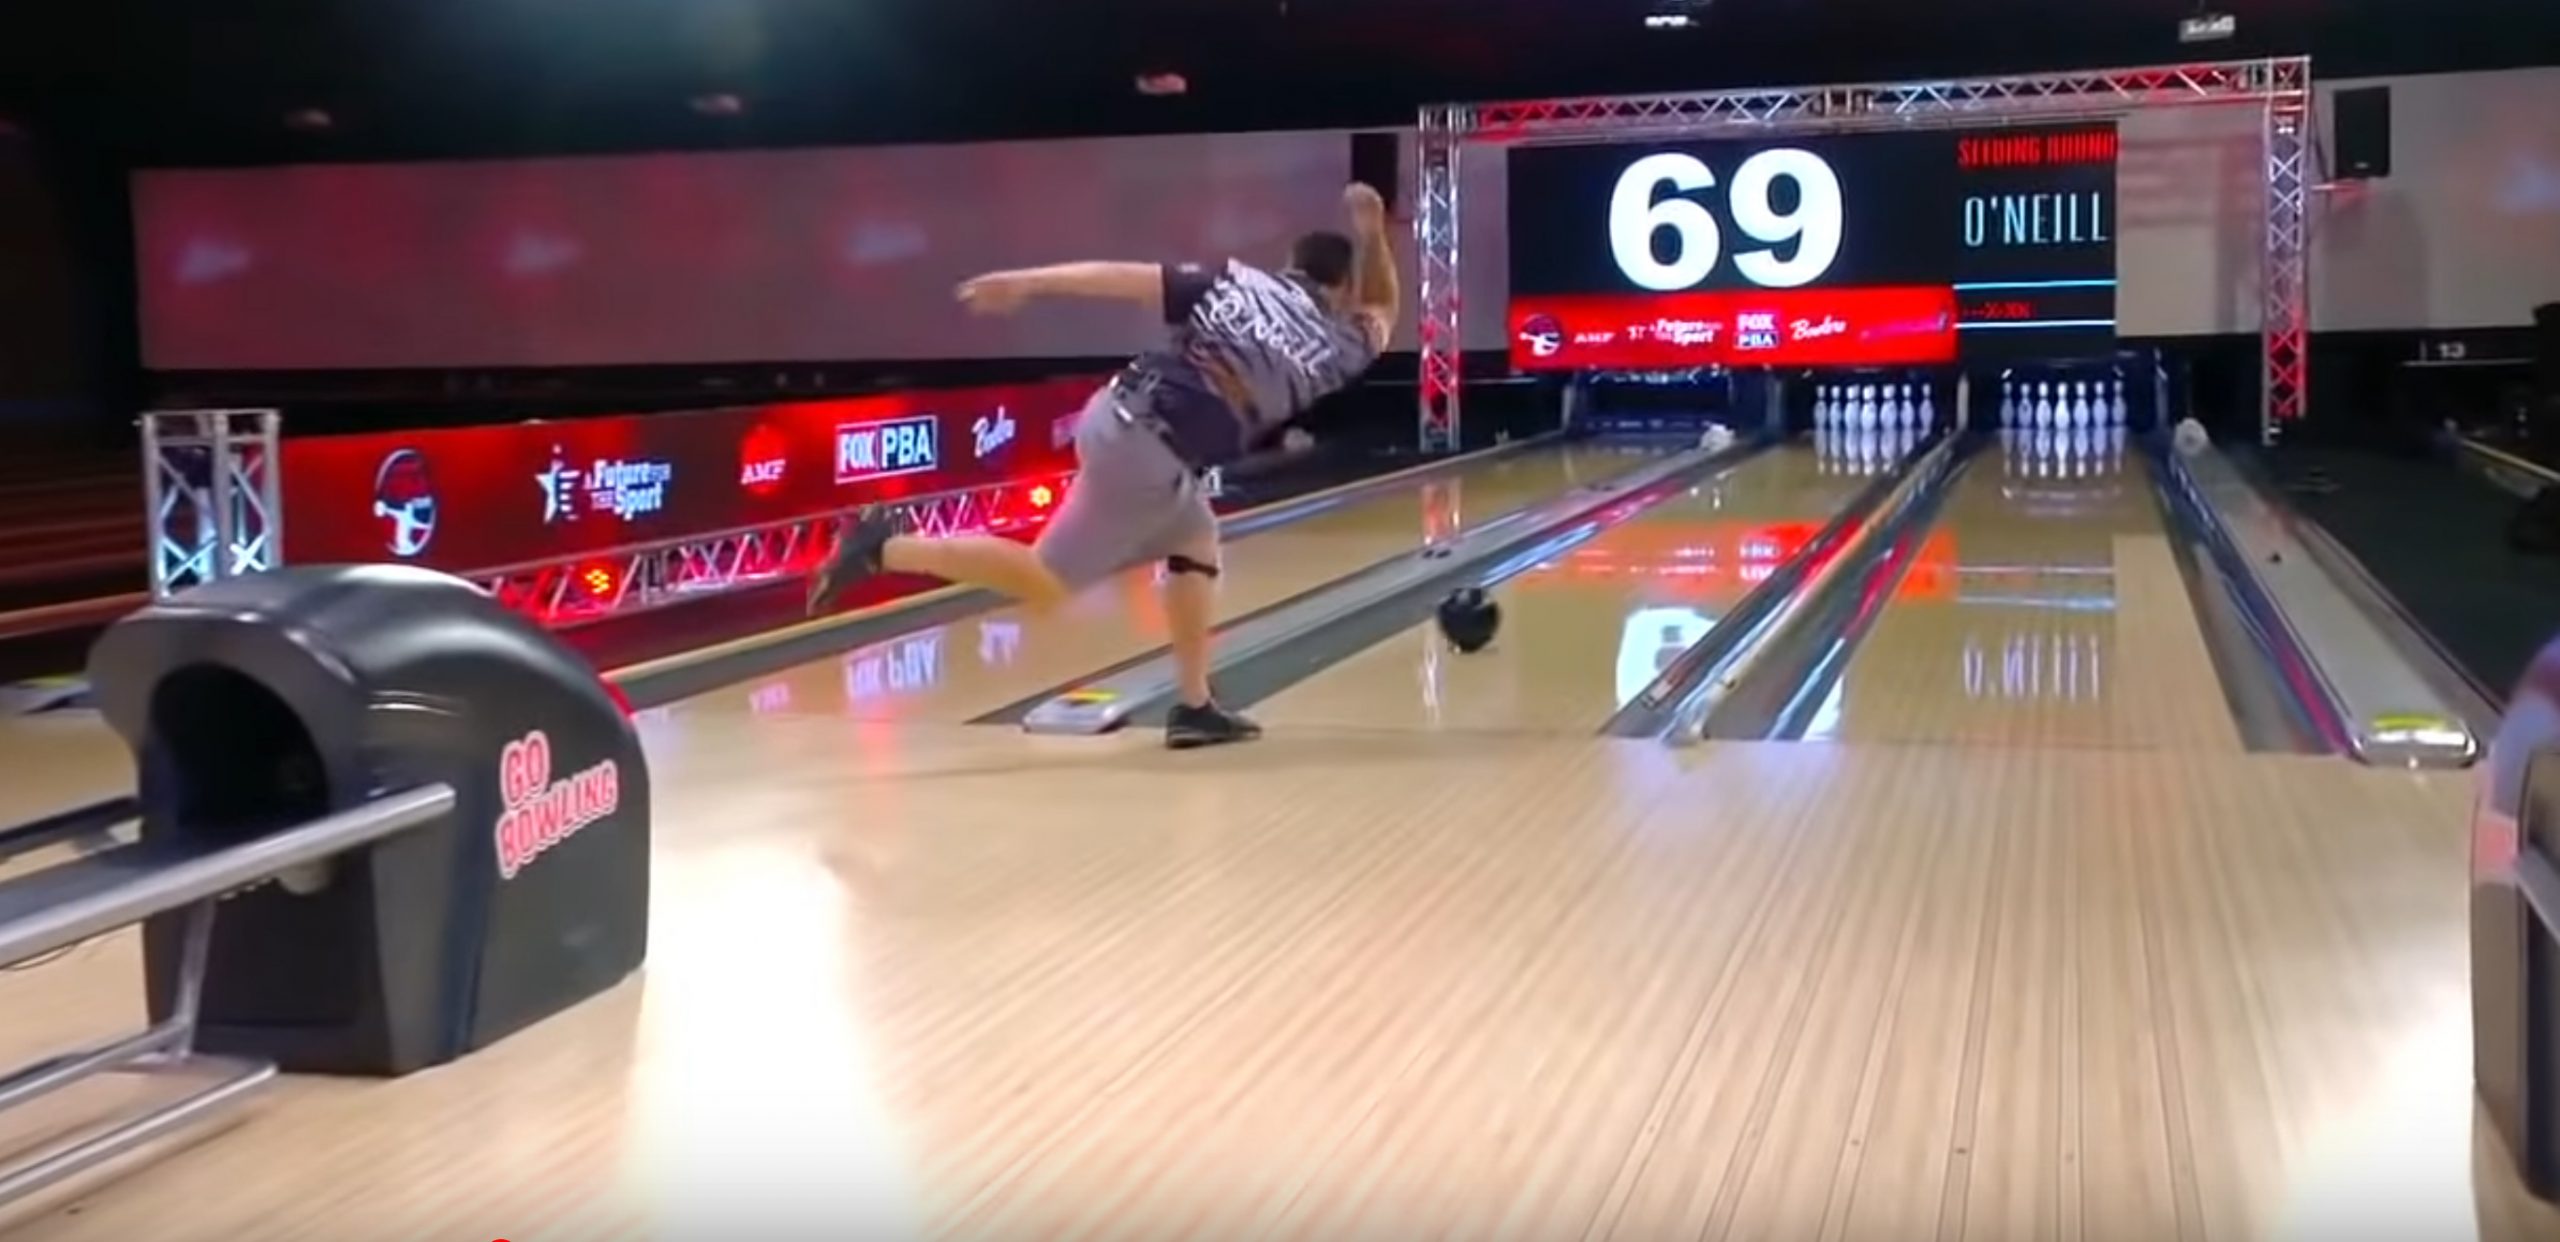 PBA Tour Rolls Back Into Action With New Strike Derby Format on Fox